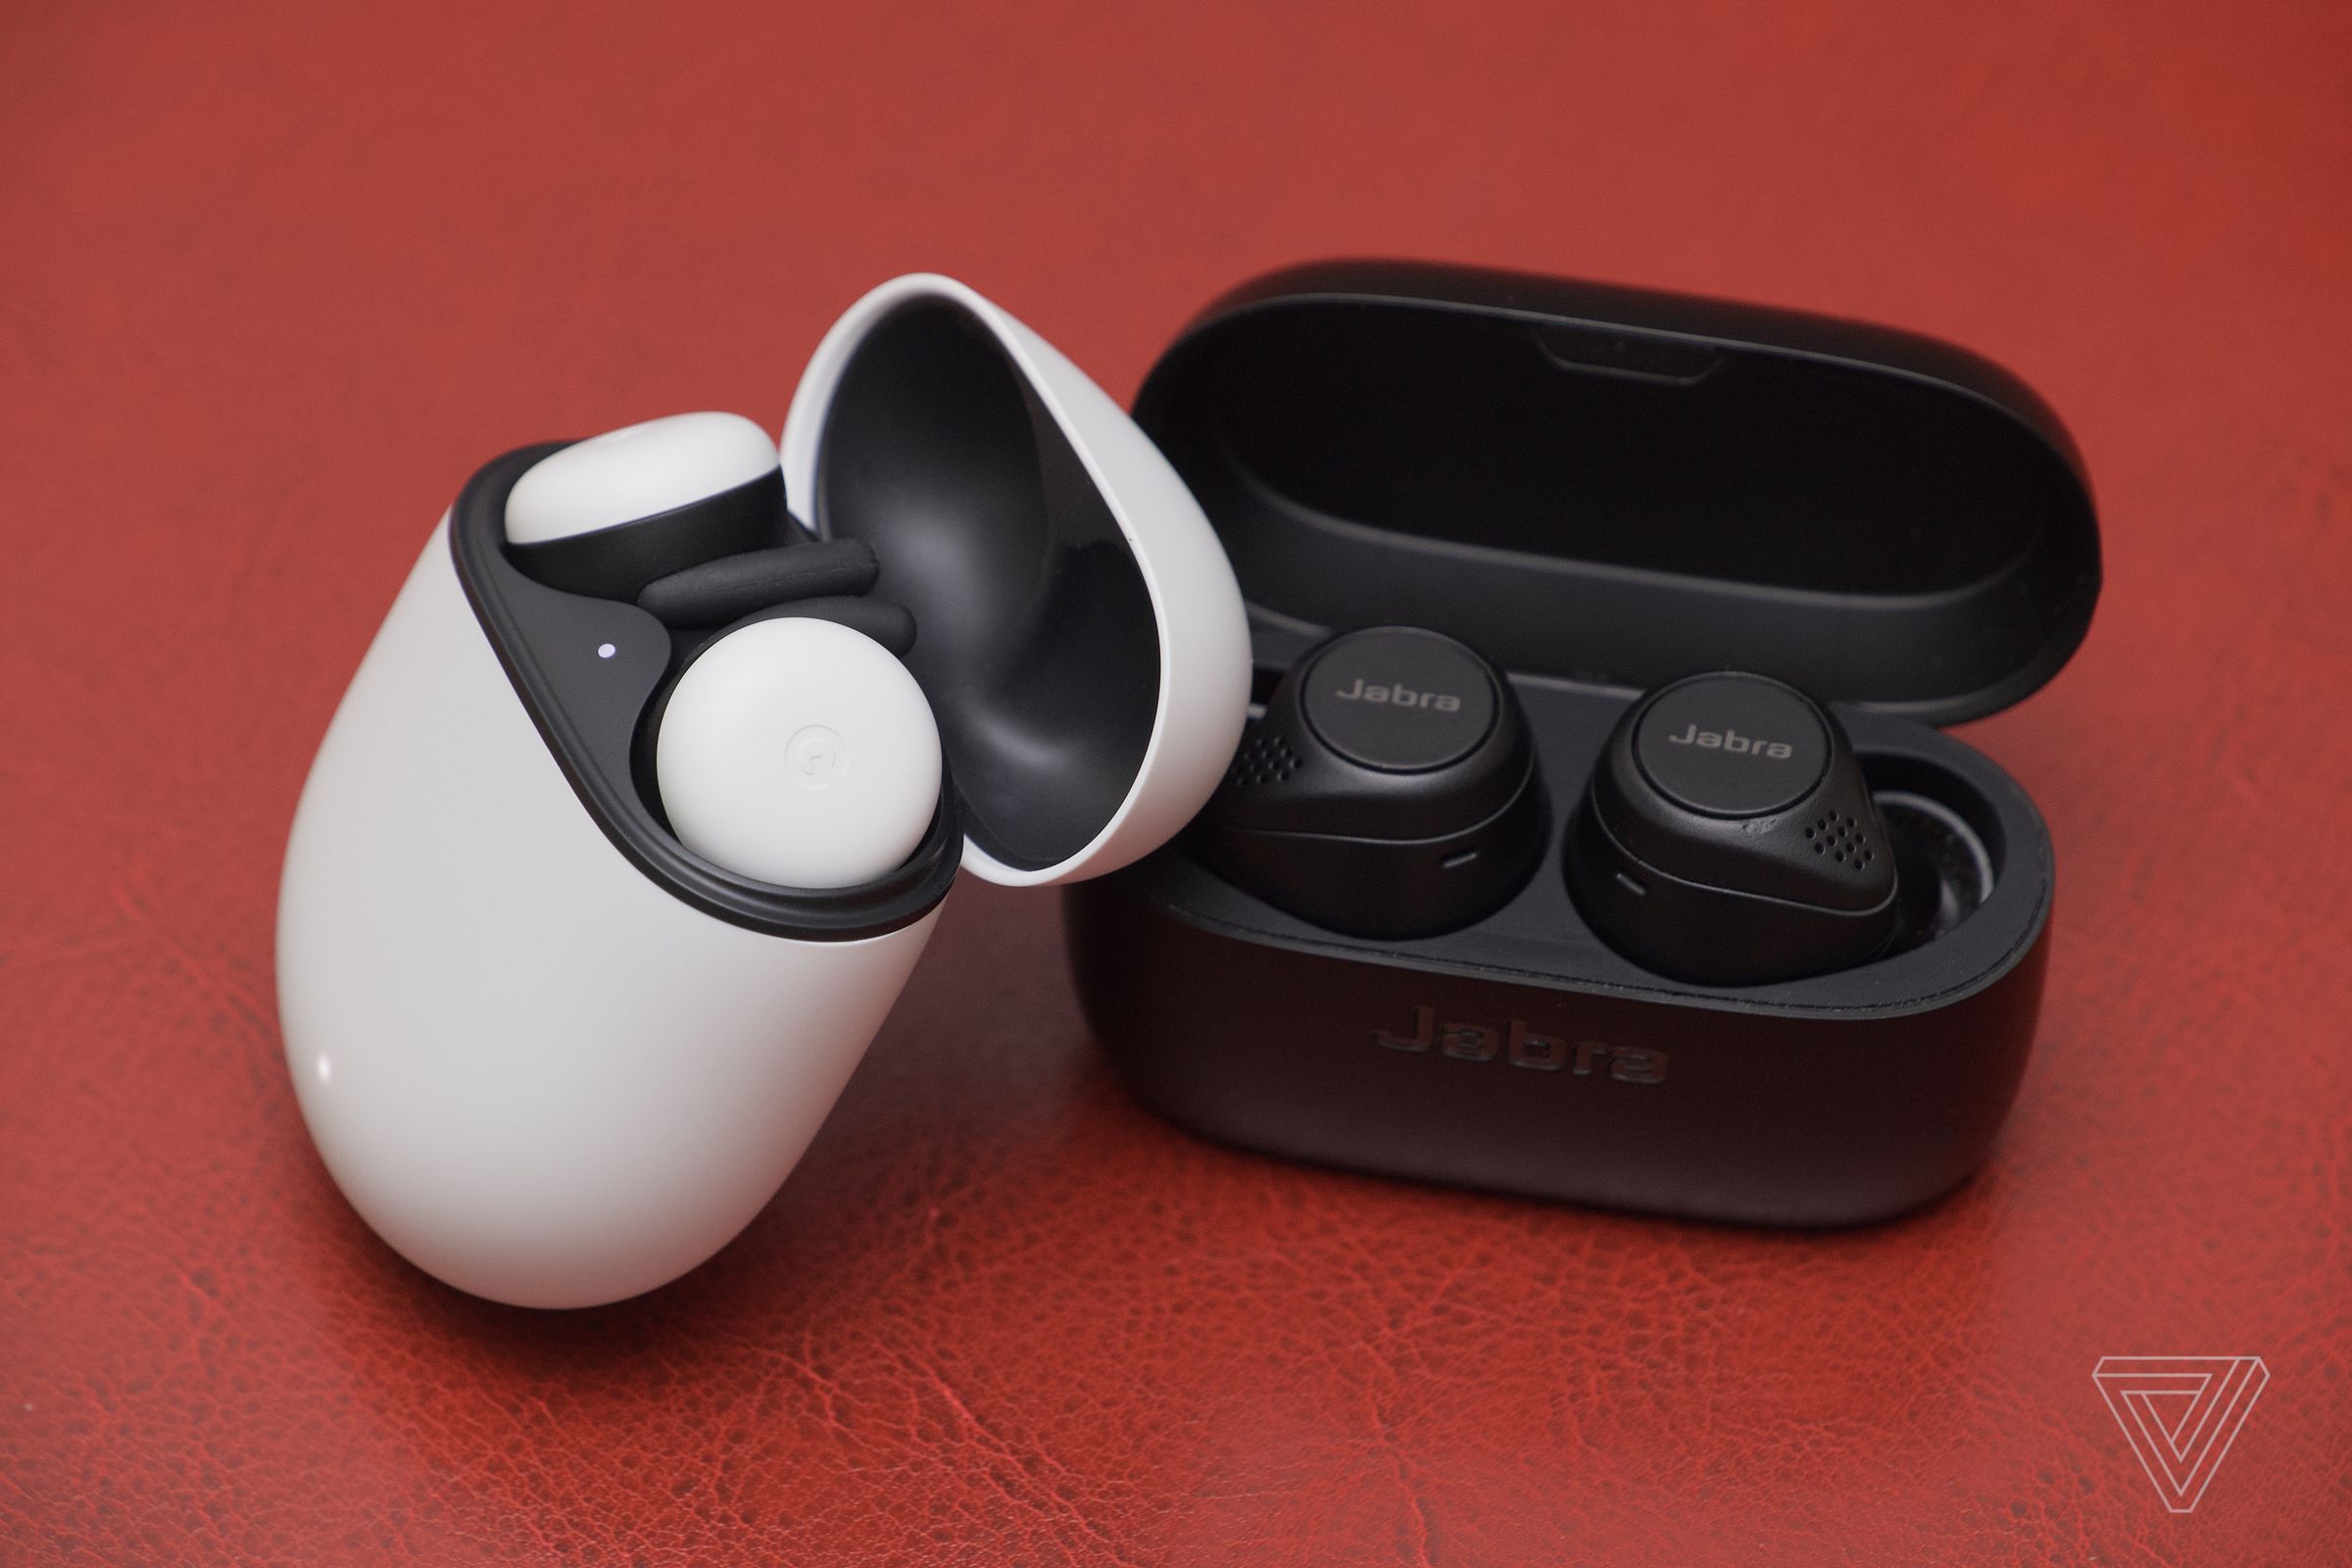 Google’s competition includes the Jabra Elite 75t earbuds for around the same price.